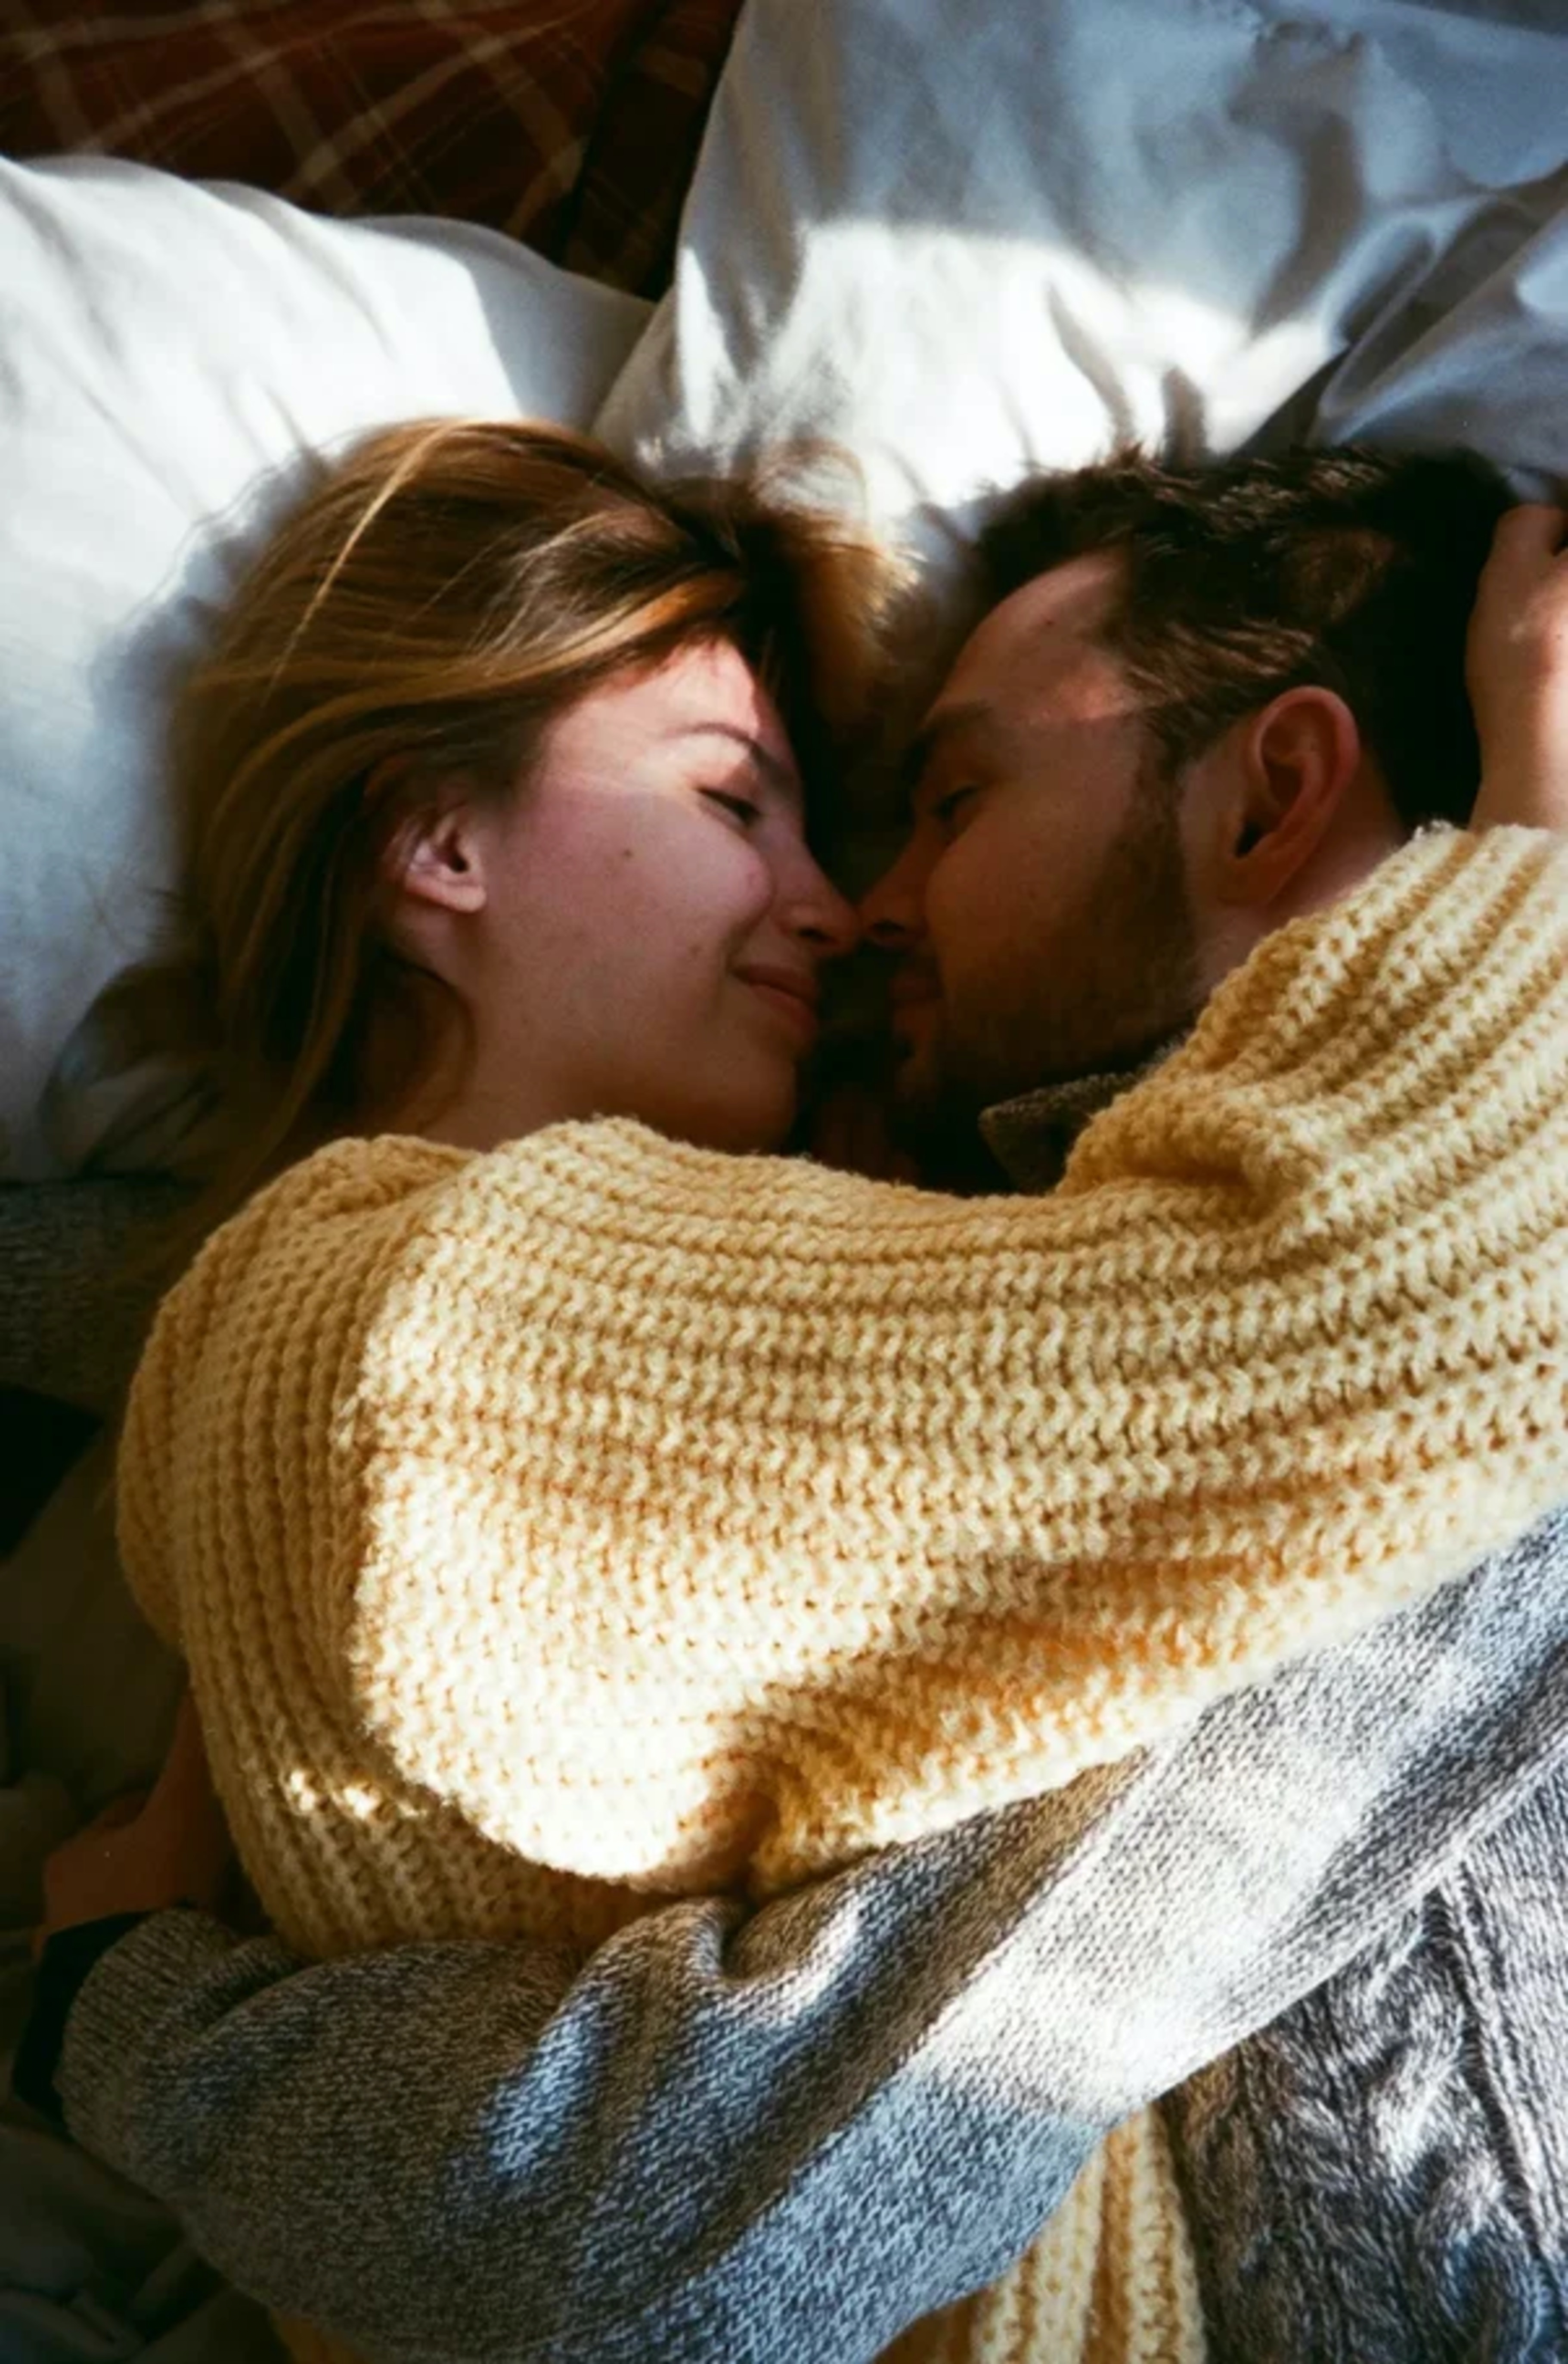 Woman in knit sweater lying in a bed with a man. | Source: Pexels